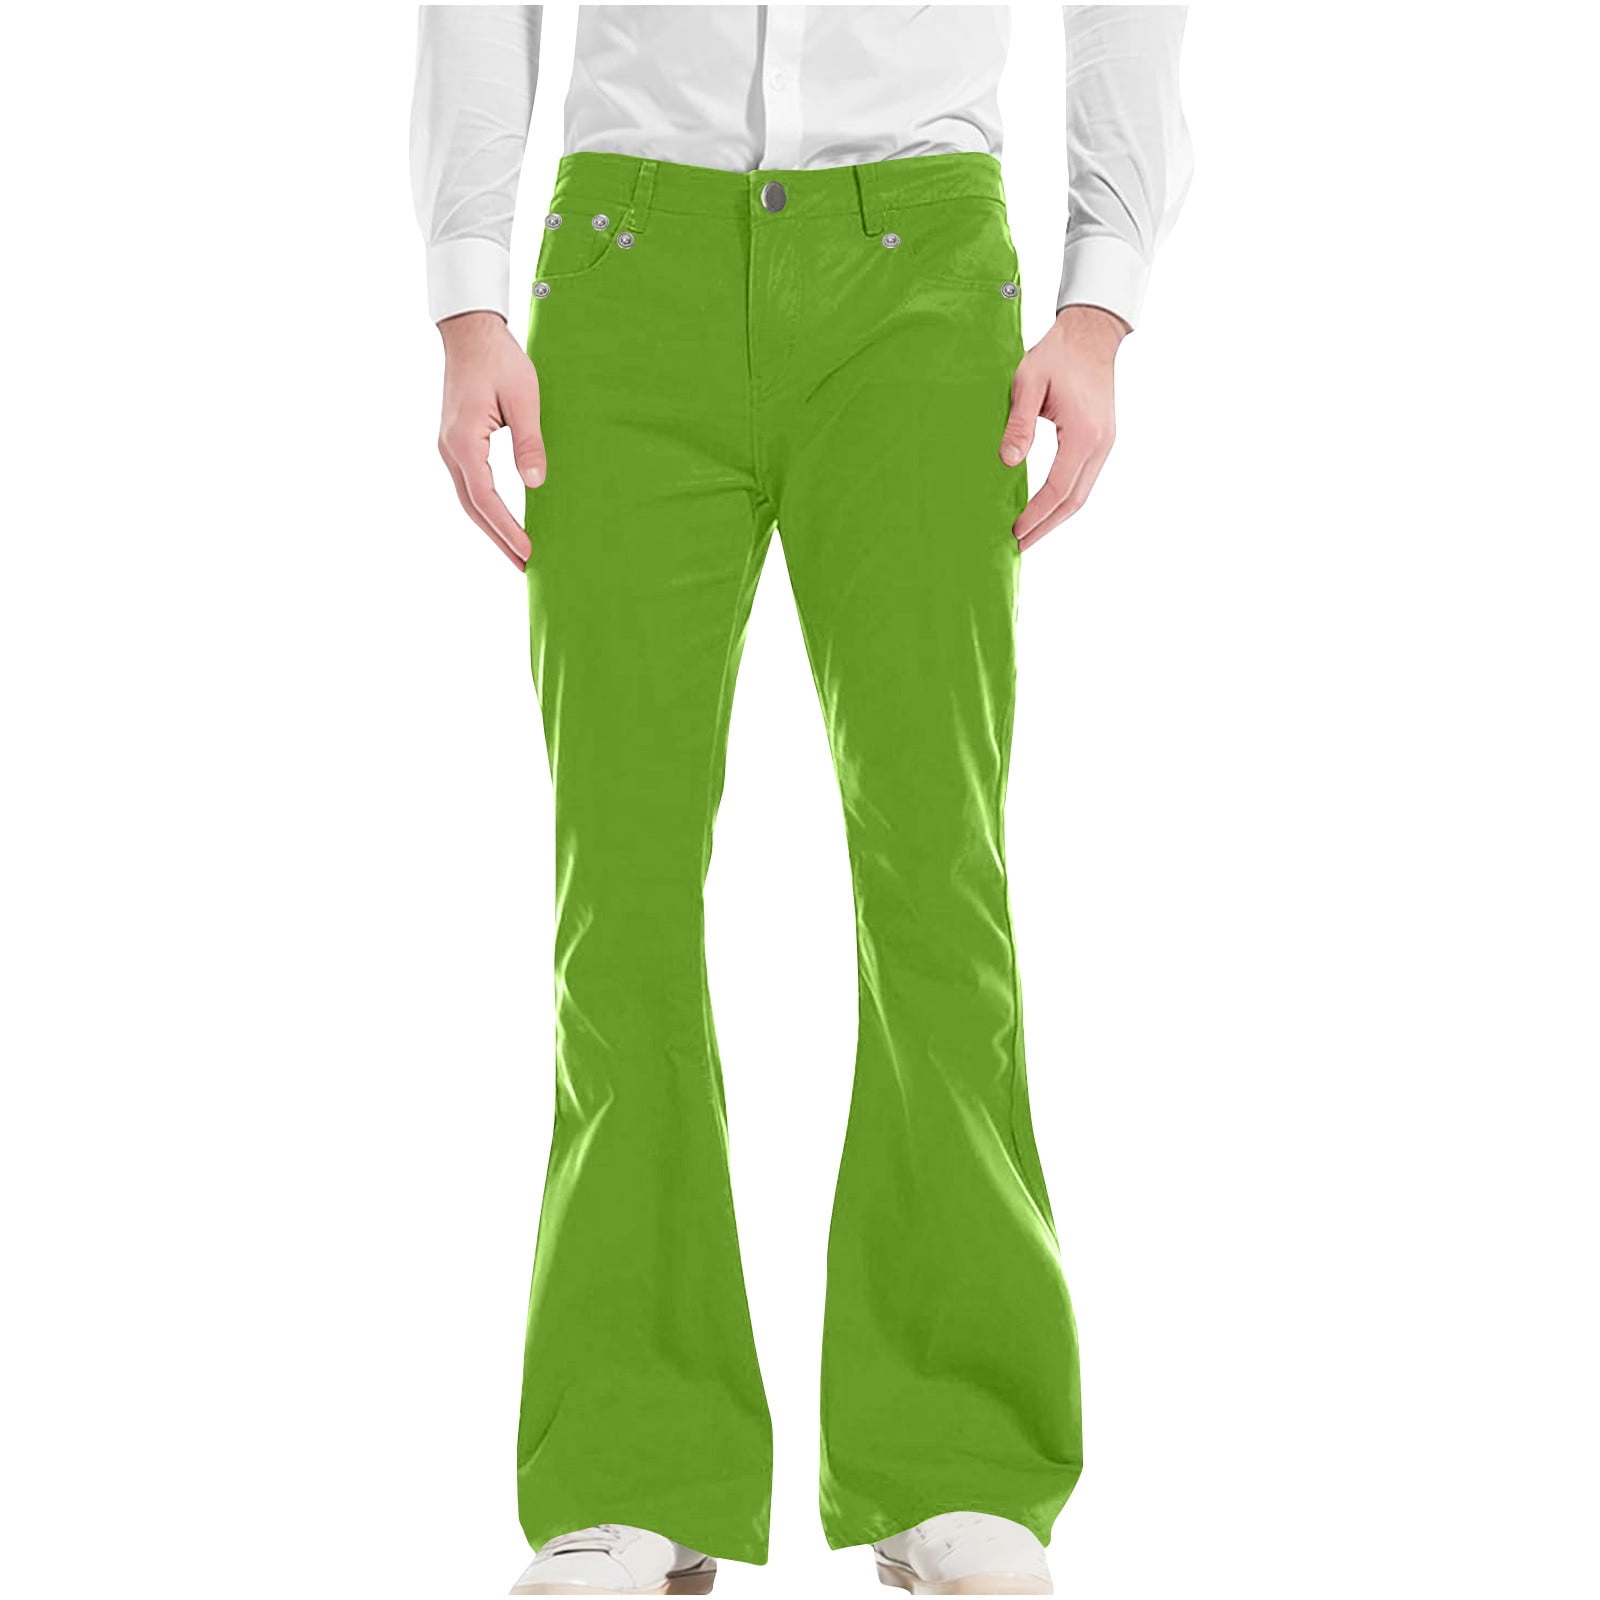 AherBiu Mens Vintage Flare Pants High Waisted Solid Color Retro Bell Bottom  Pants for Men Solid Color 